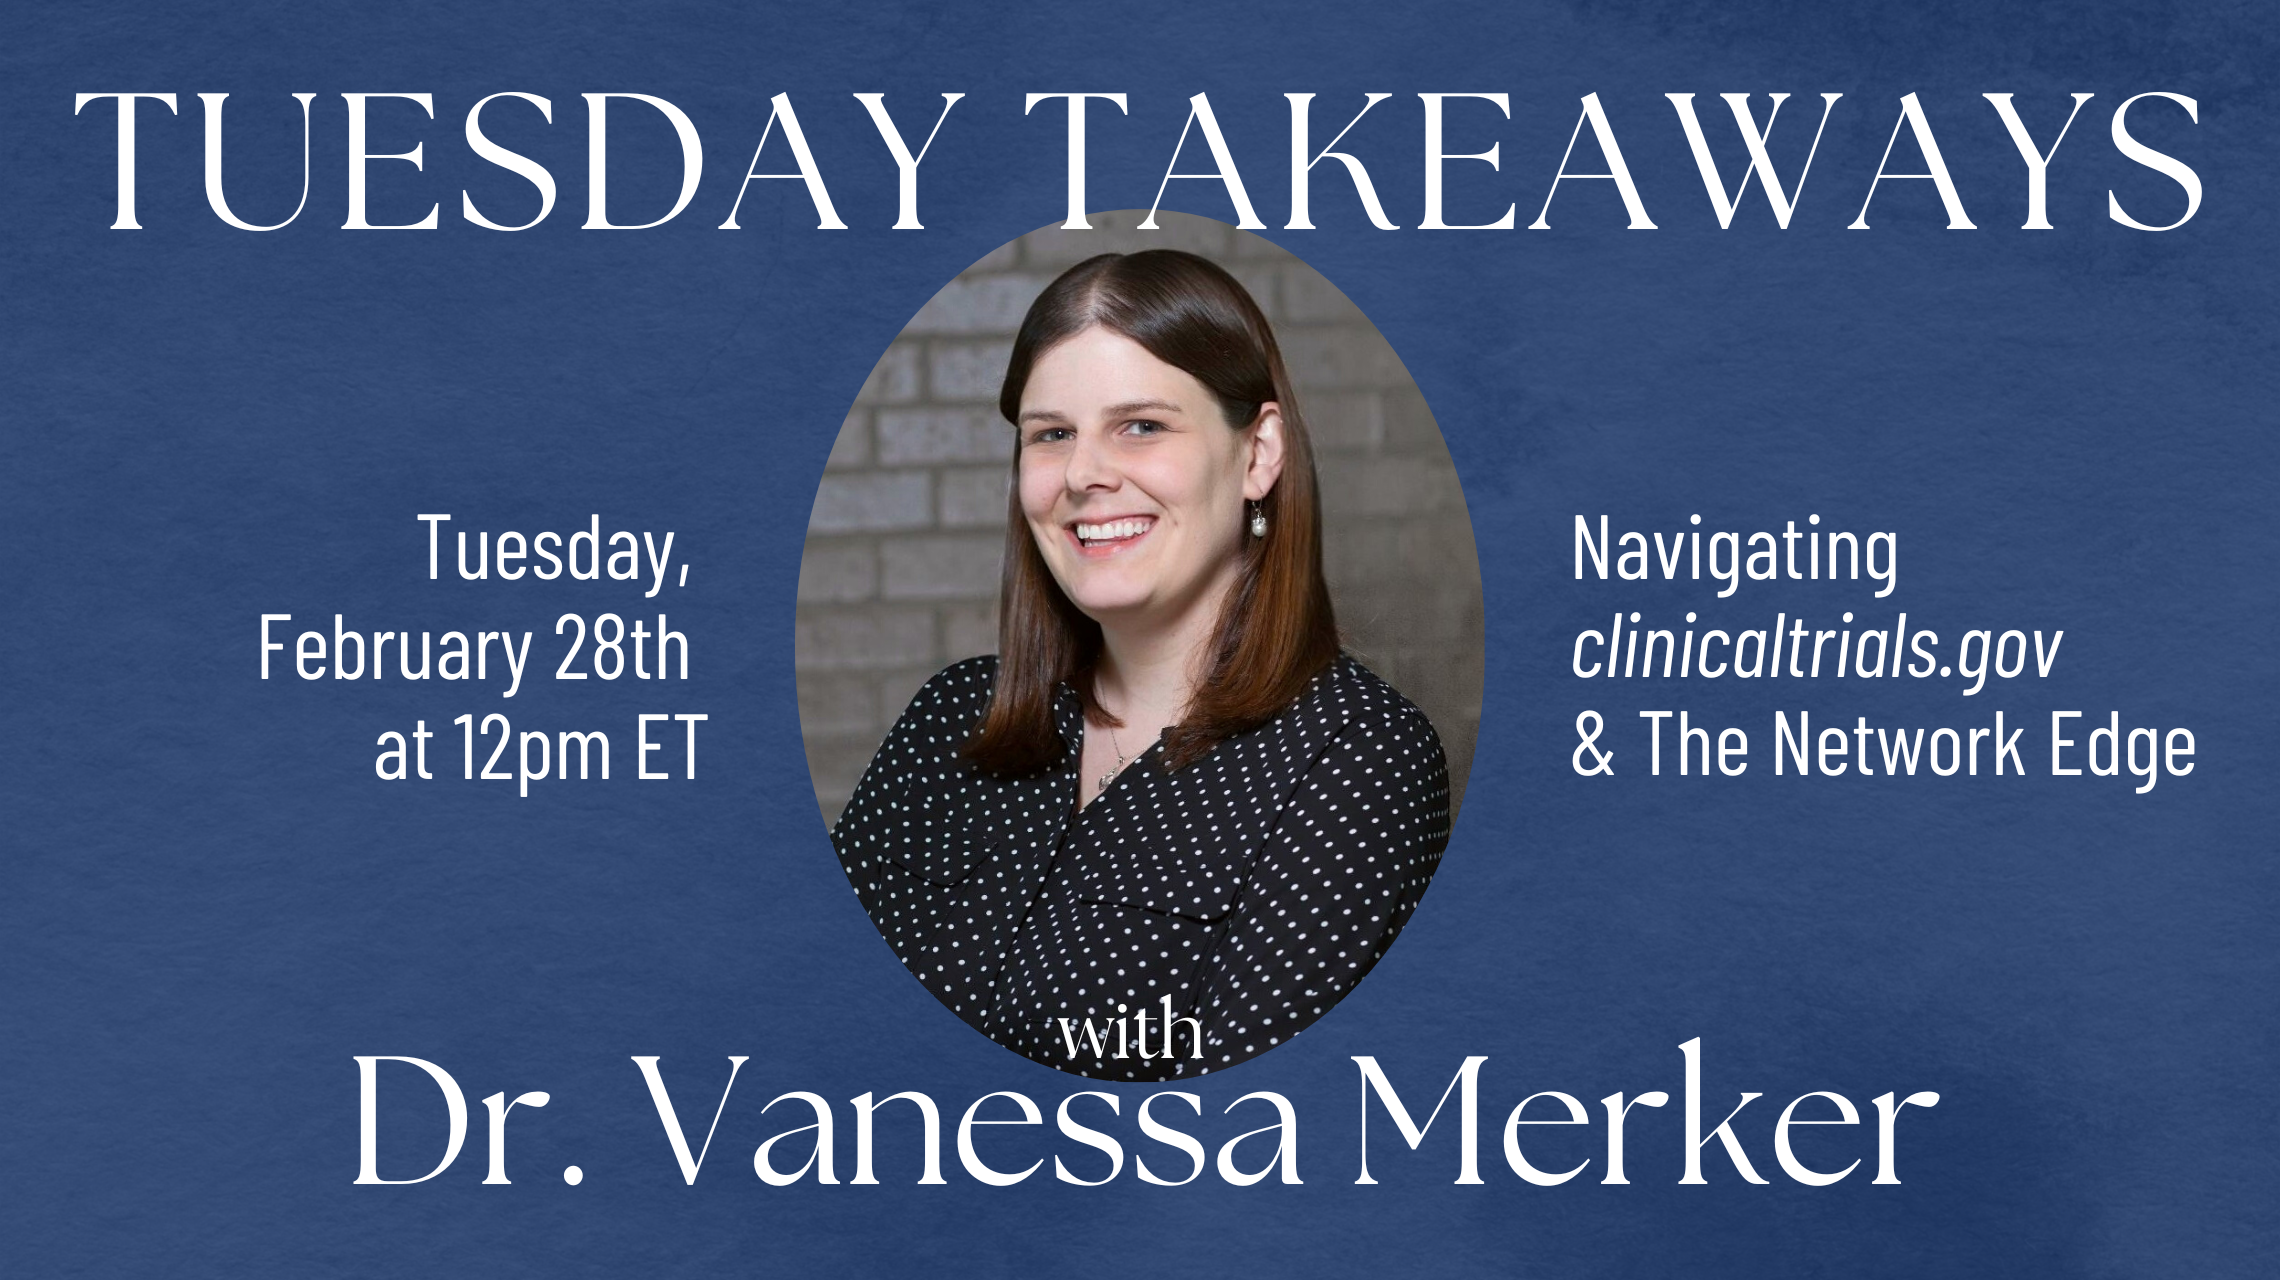 Tuesday Takeaways informational event graphic with photo of Dr. Vanessa Merker